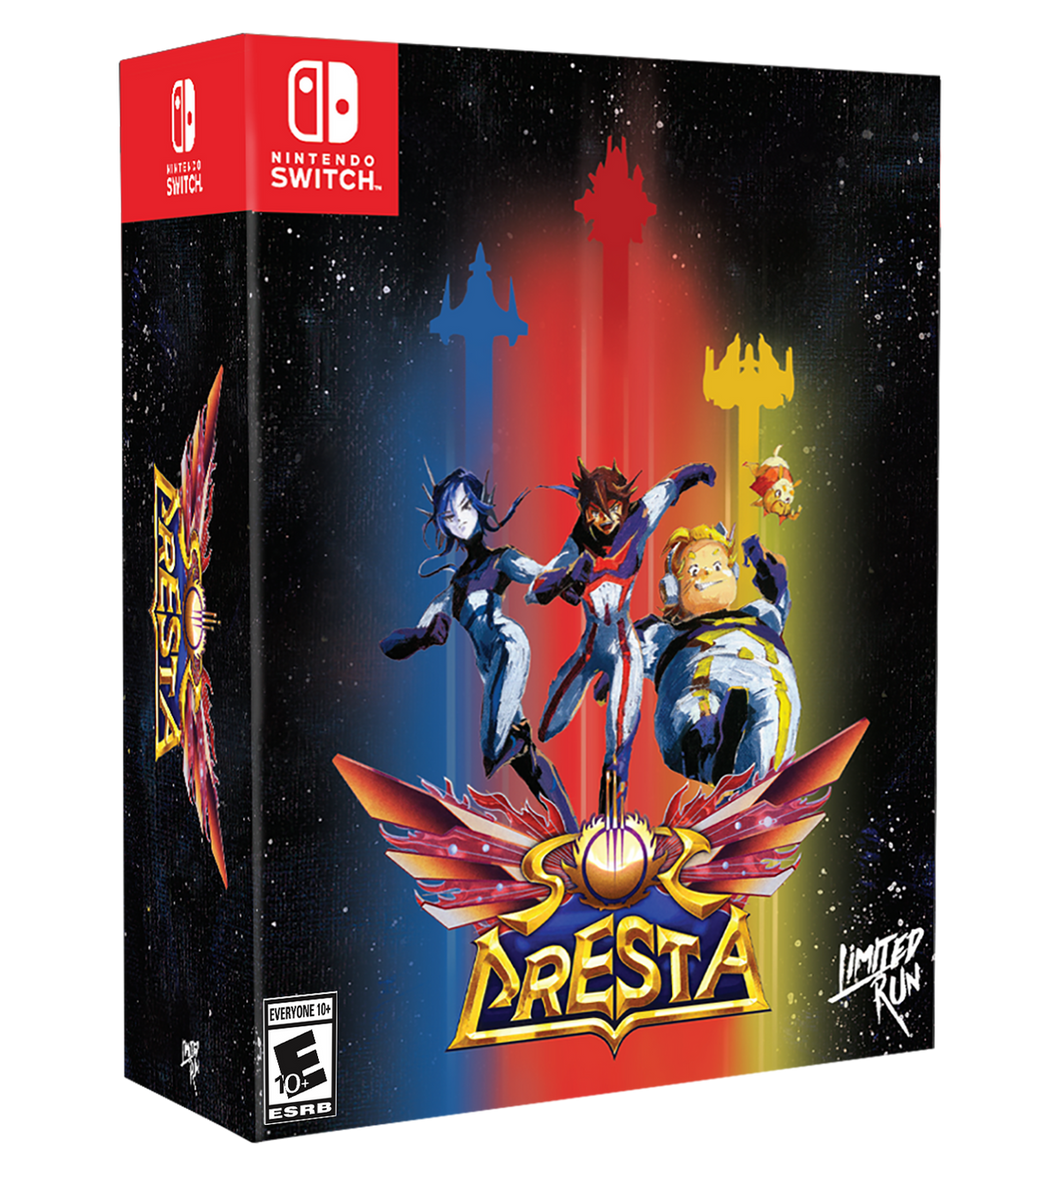 Sol cresta Dramatic edition Collector's edition / Limited run games / Switch